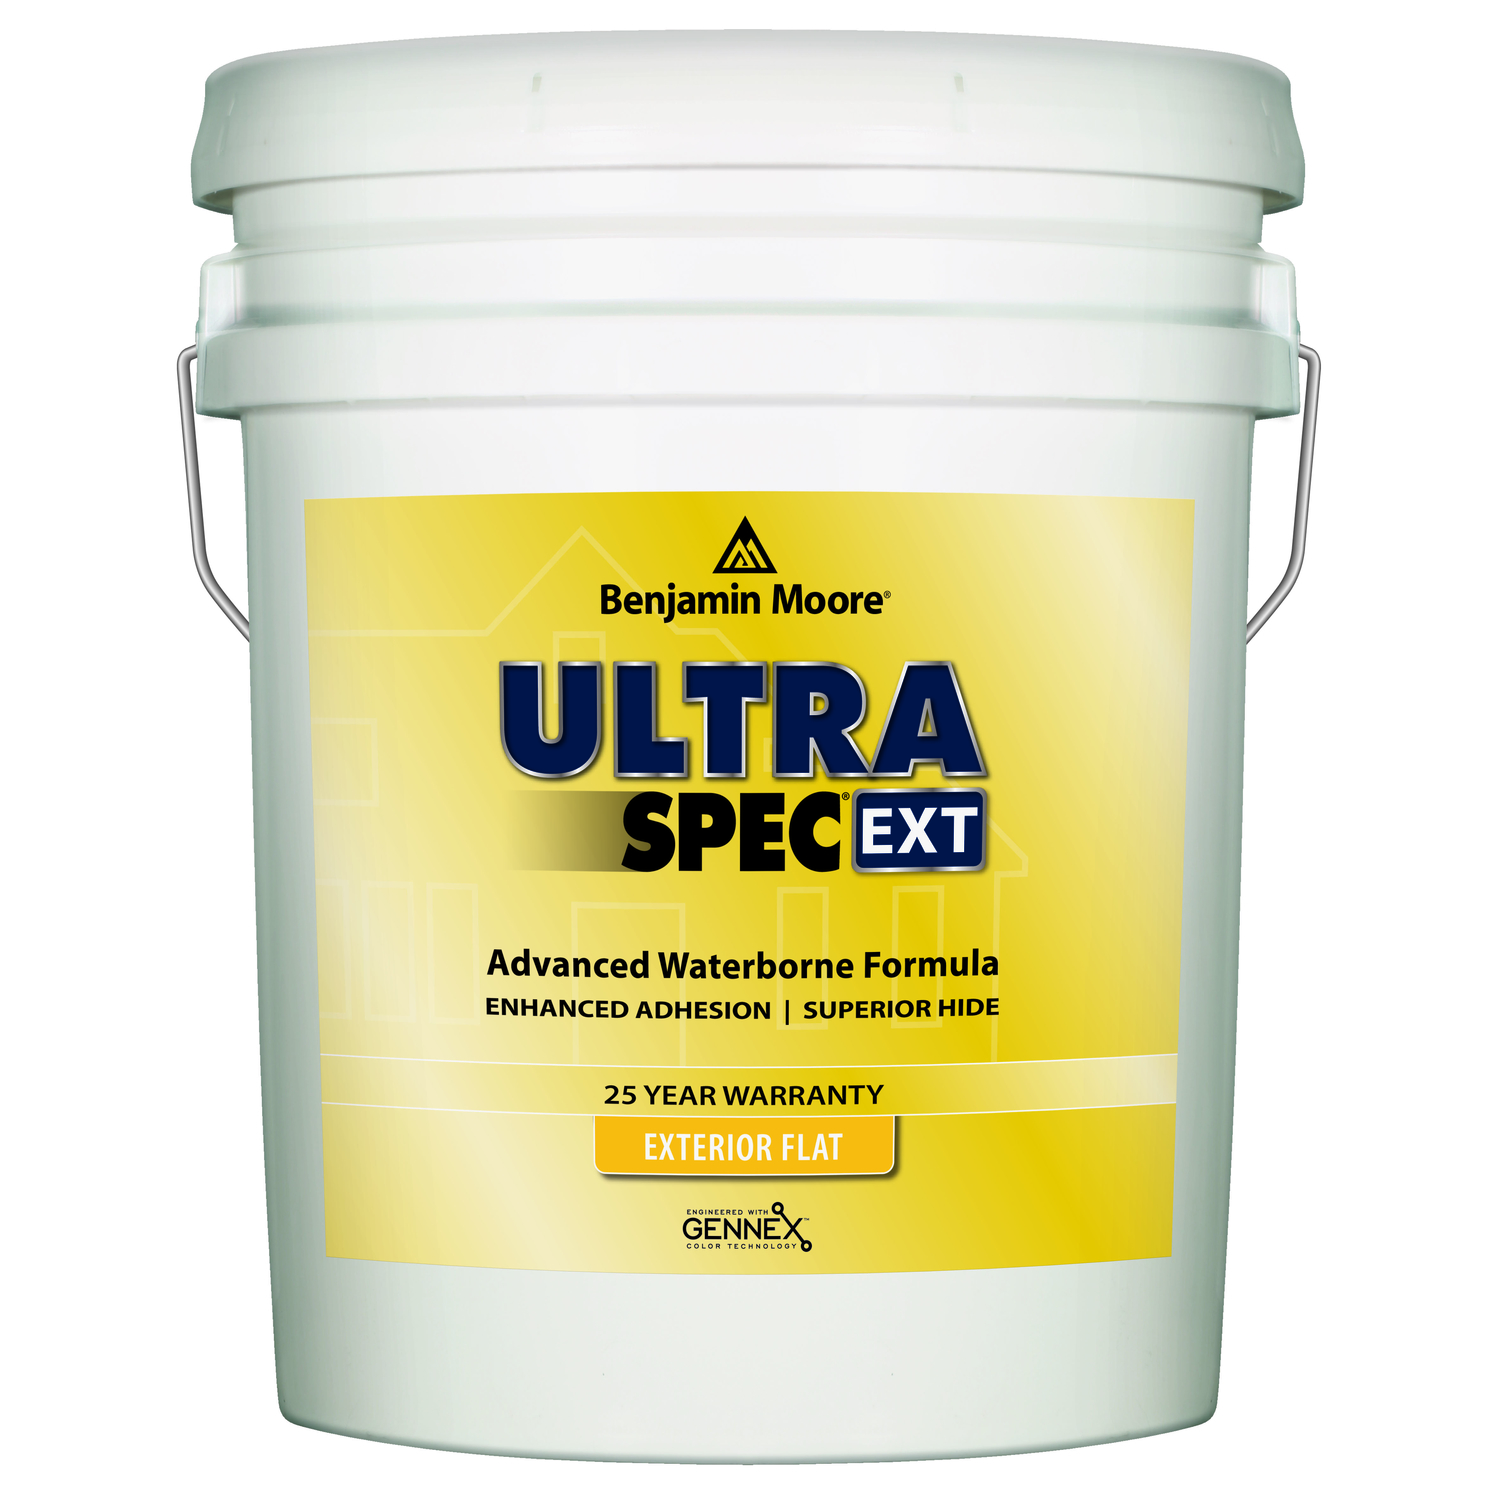 Benjamin Moore Ultra Spec Flat White Water-Based Exterior Paint and Primer Exterior 5 gal